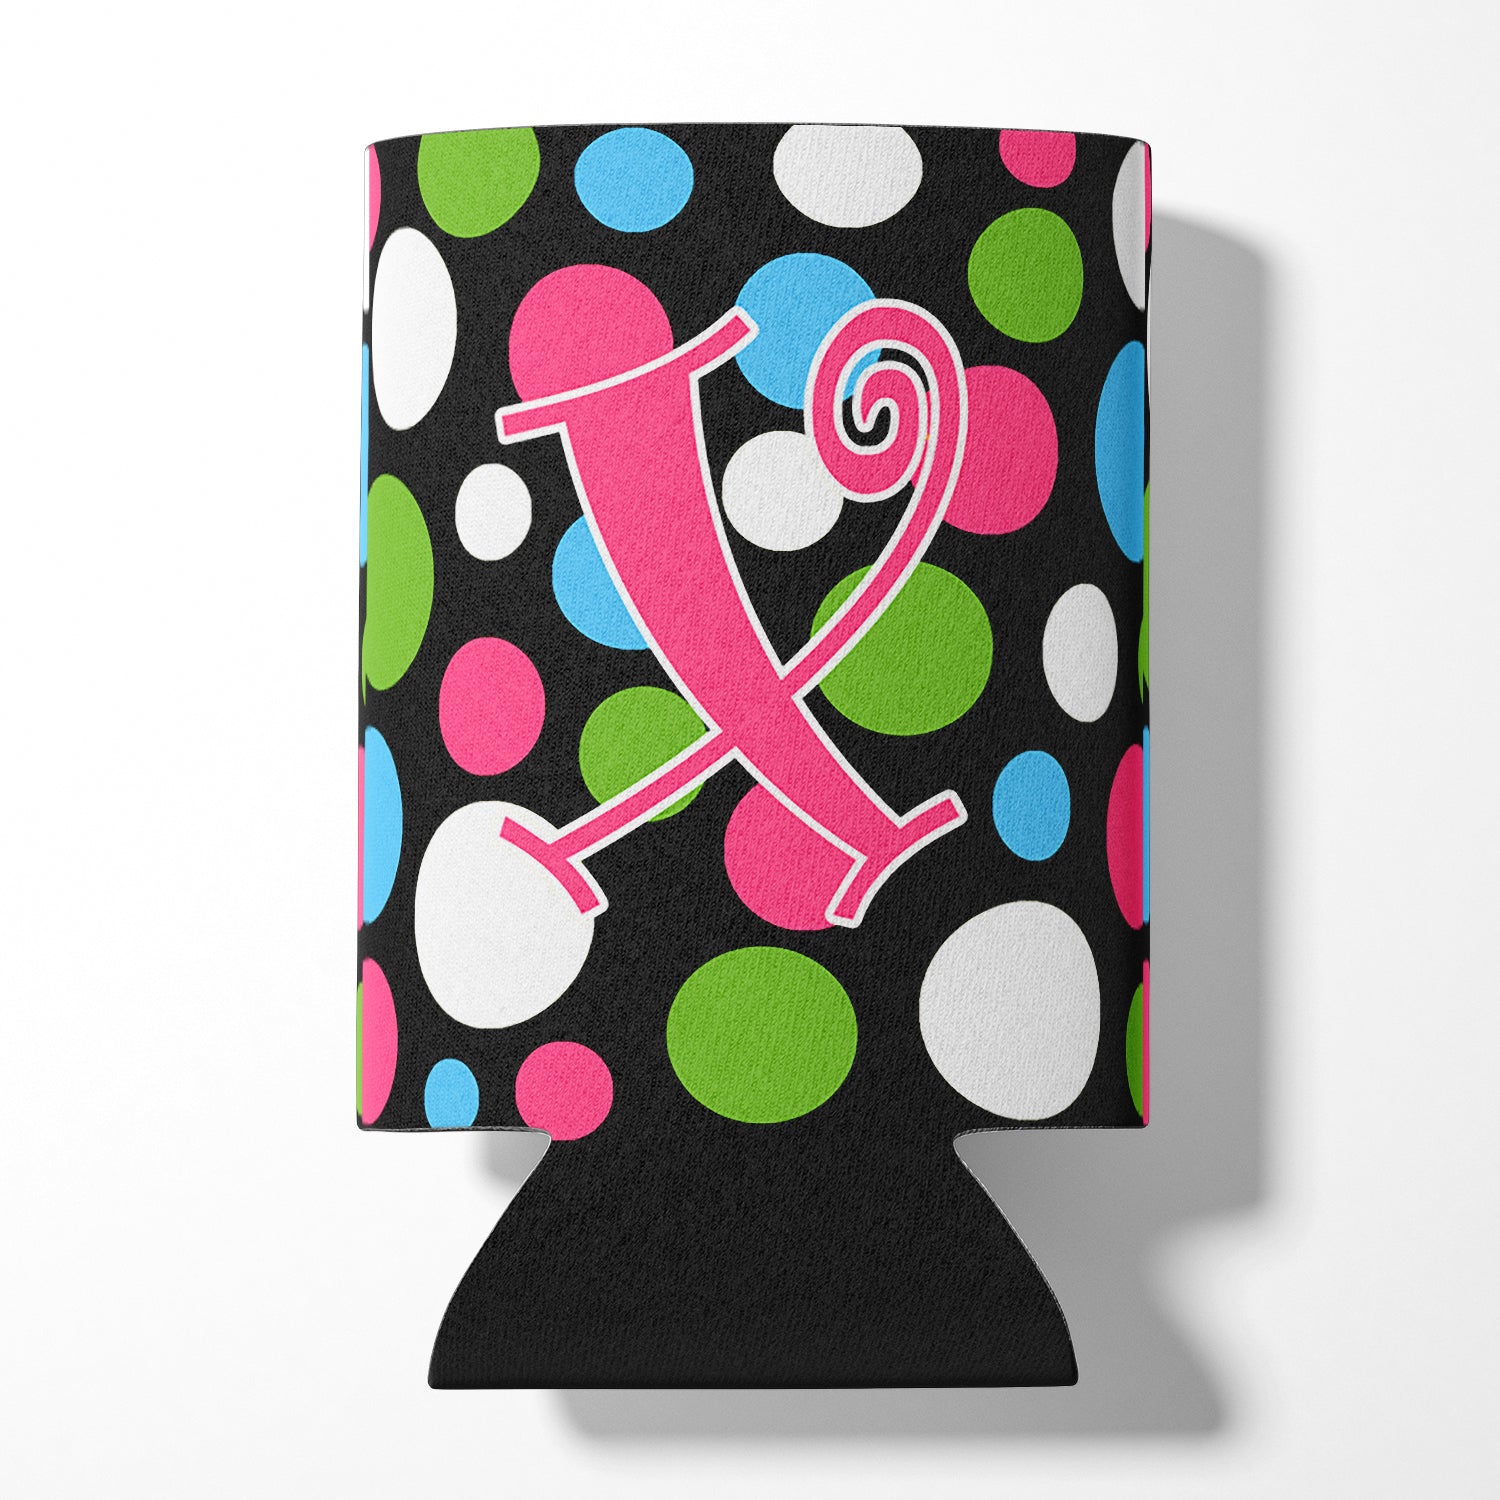 Letter X Initial Monogram - Polkadots and Pink Can or Bottle Beverage Insulator Hugger.